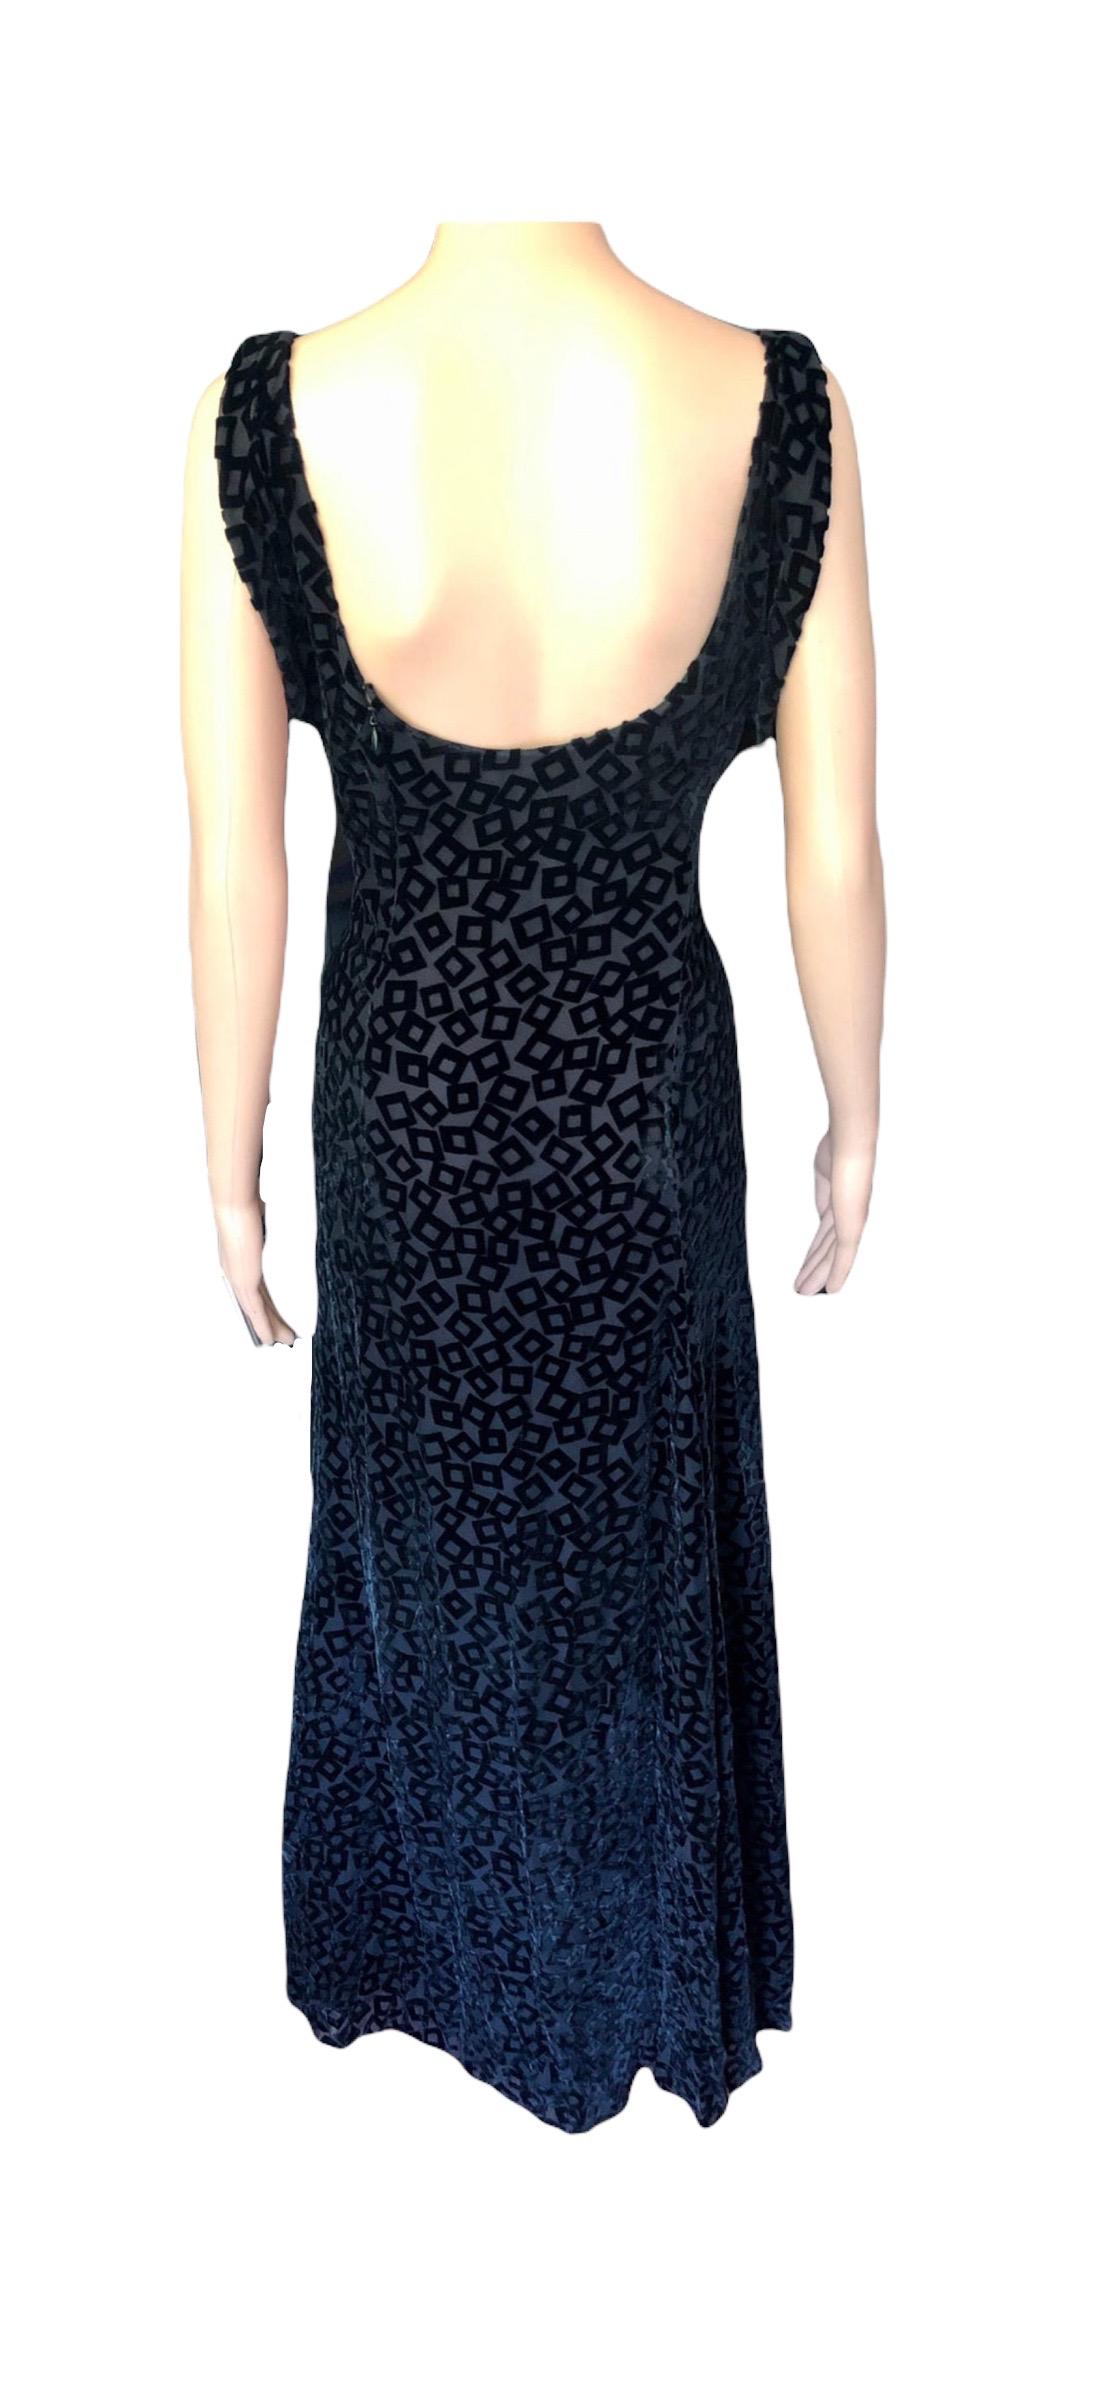 Gianni Versace S/S 1999 Vintage Black Evening Dress Gown For Sale 7